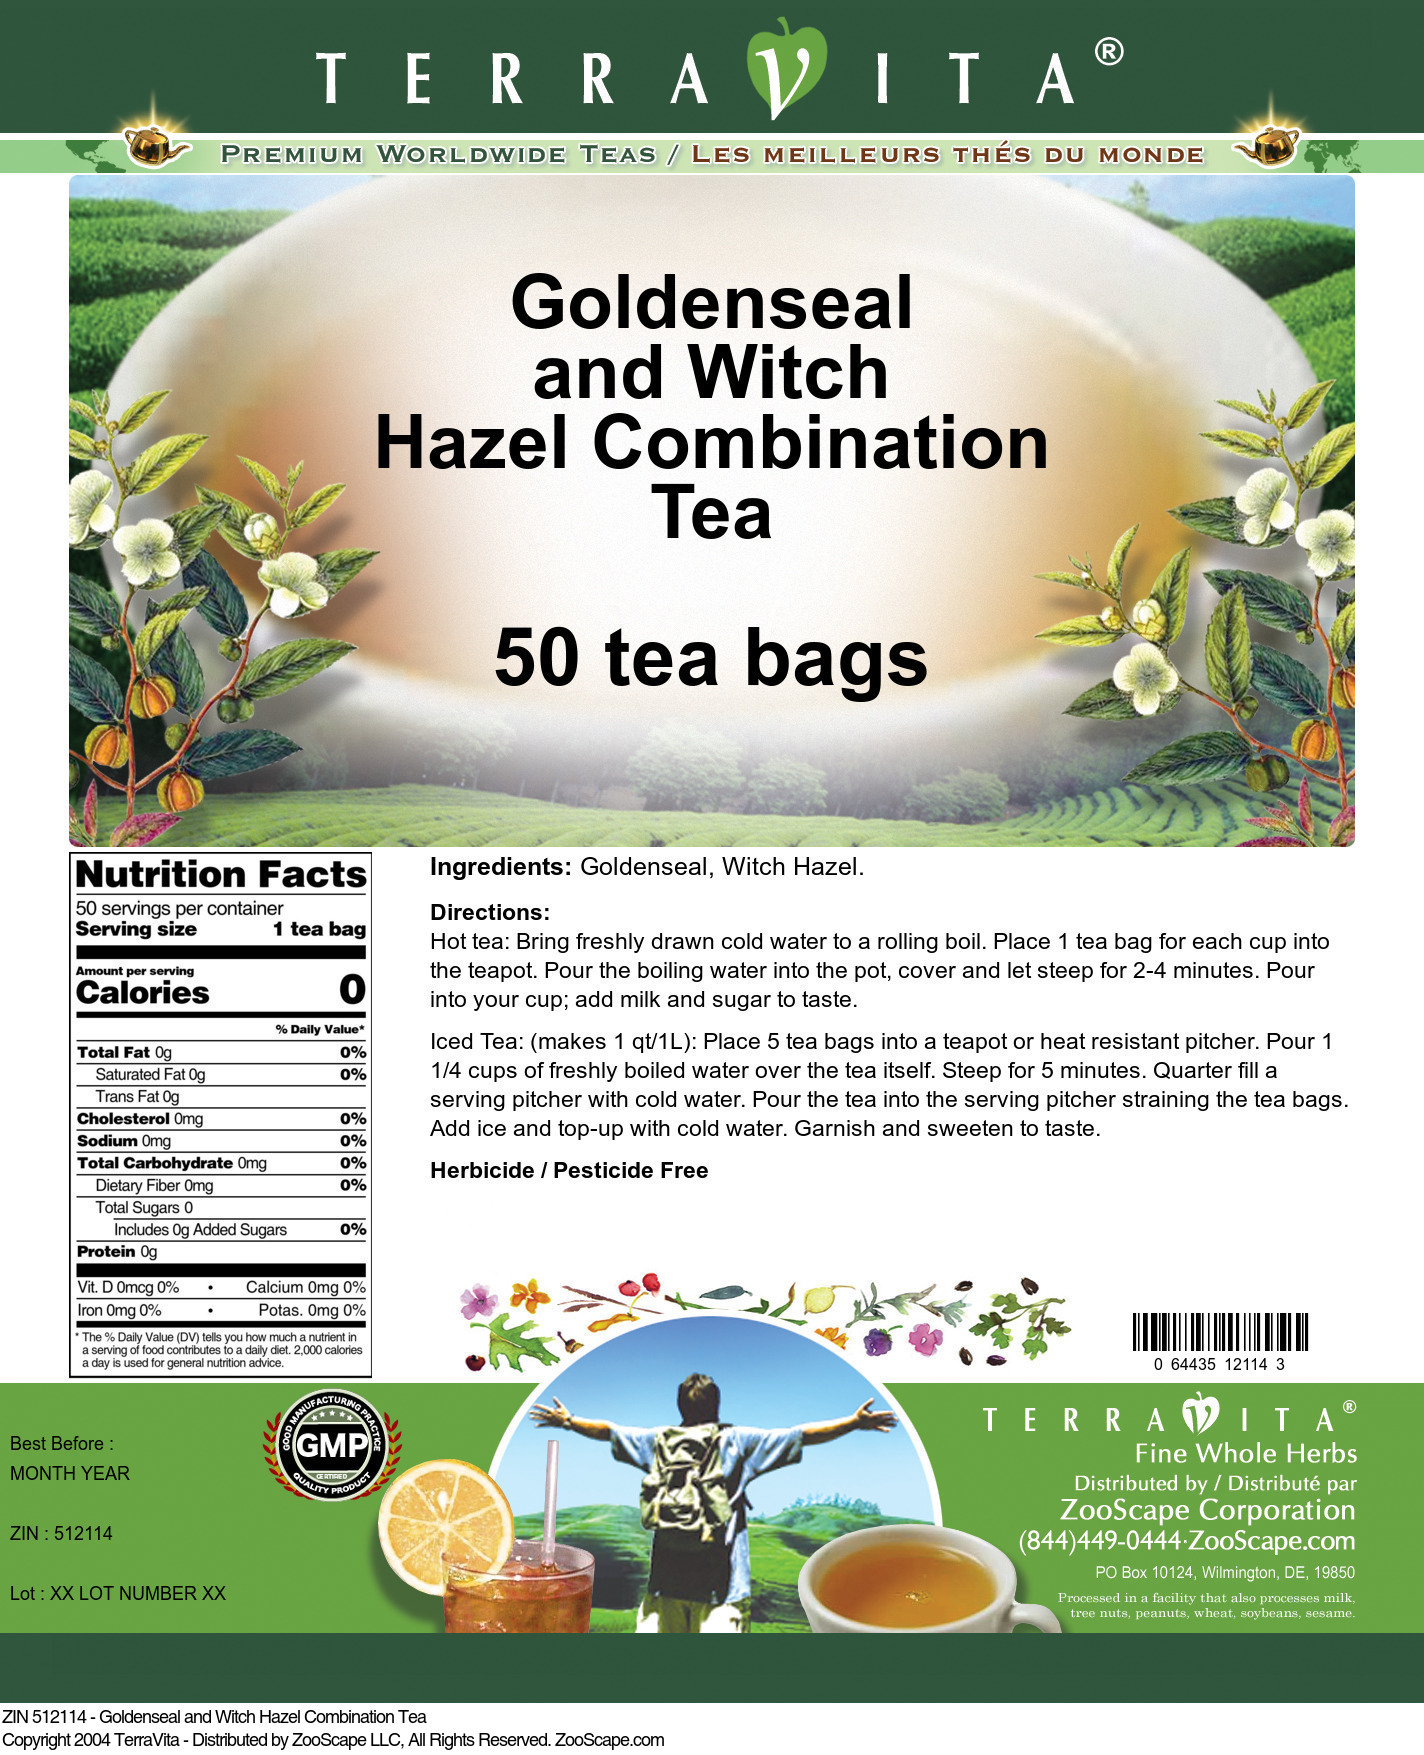 Goldenseal and Witch Hazel Combination Tea - Label